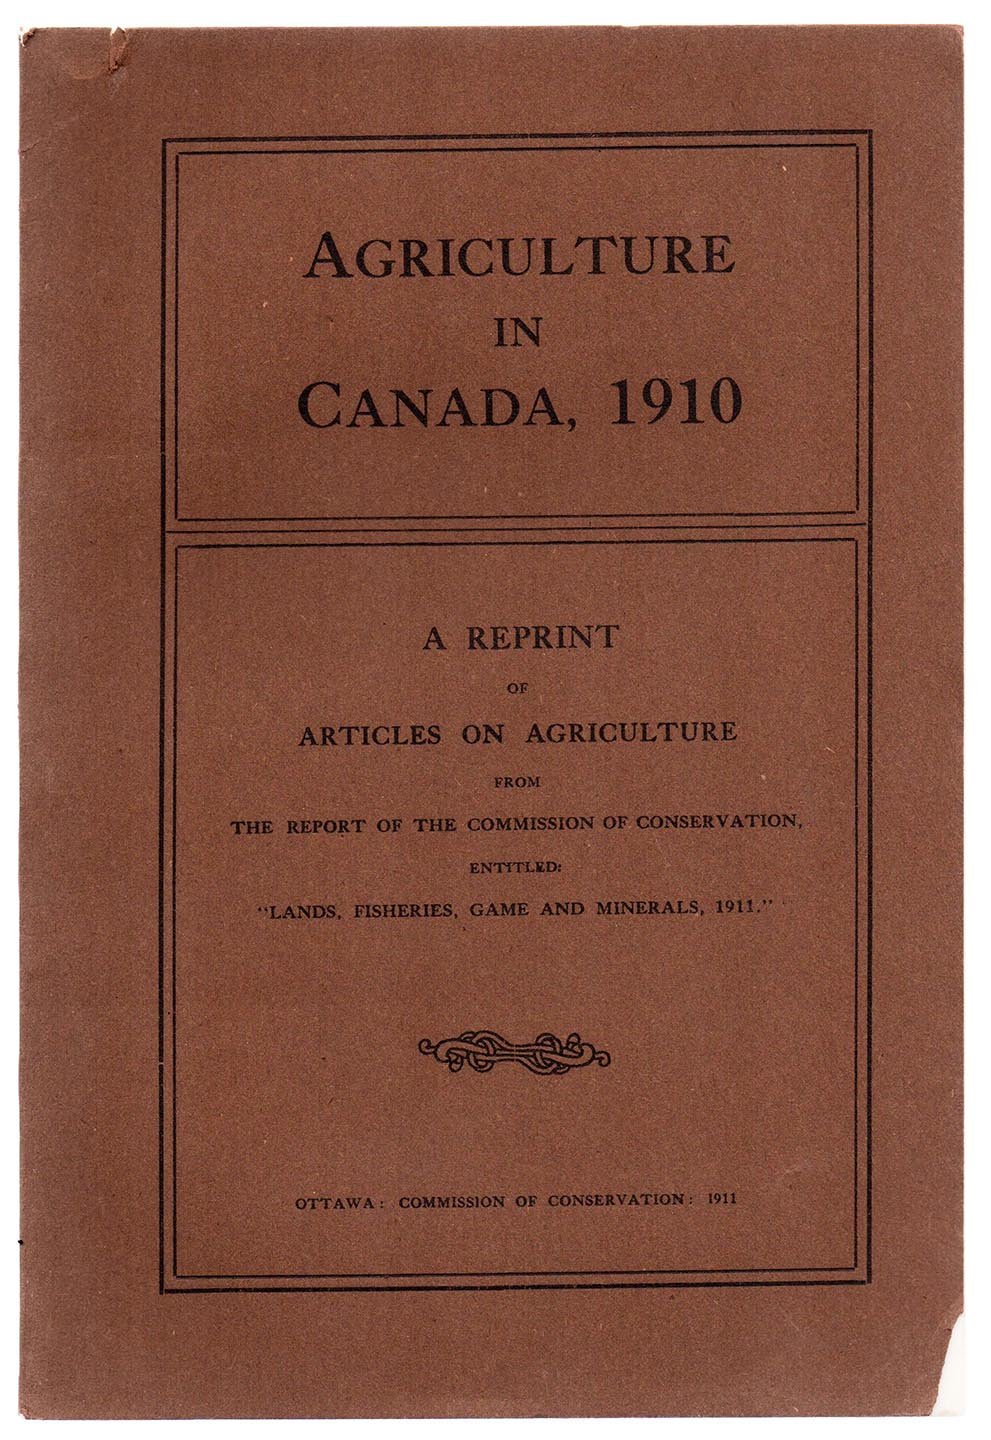 Agriculture in Canada, 1910: A Reprint of Articles on Agriculture From the Report of the Commission of Conservation, Entitled "Lands, Fisheries, Game and Minerals, 1911"